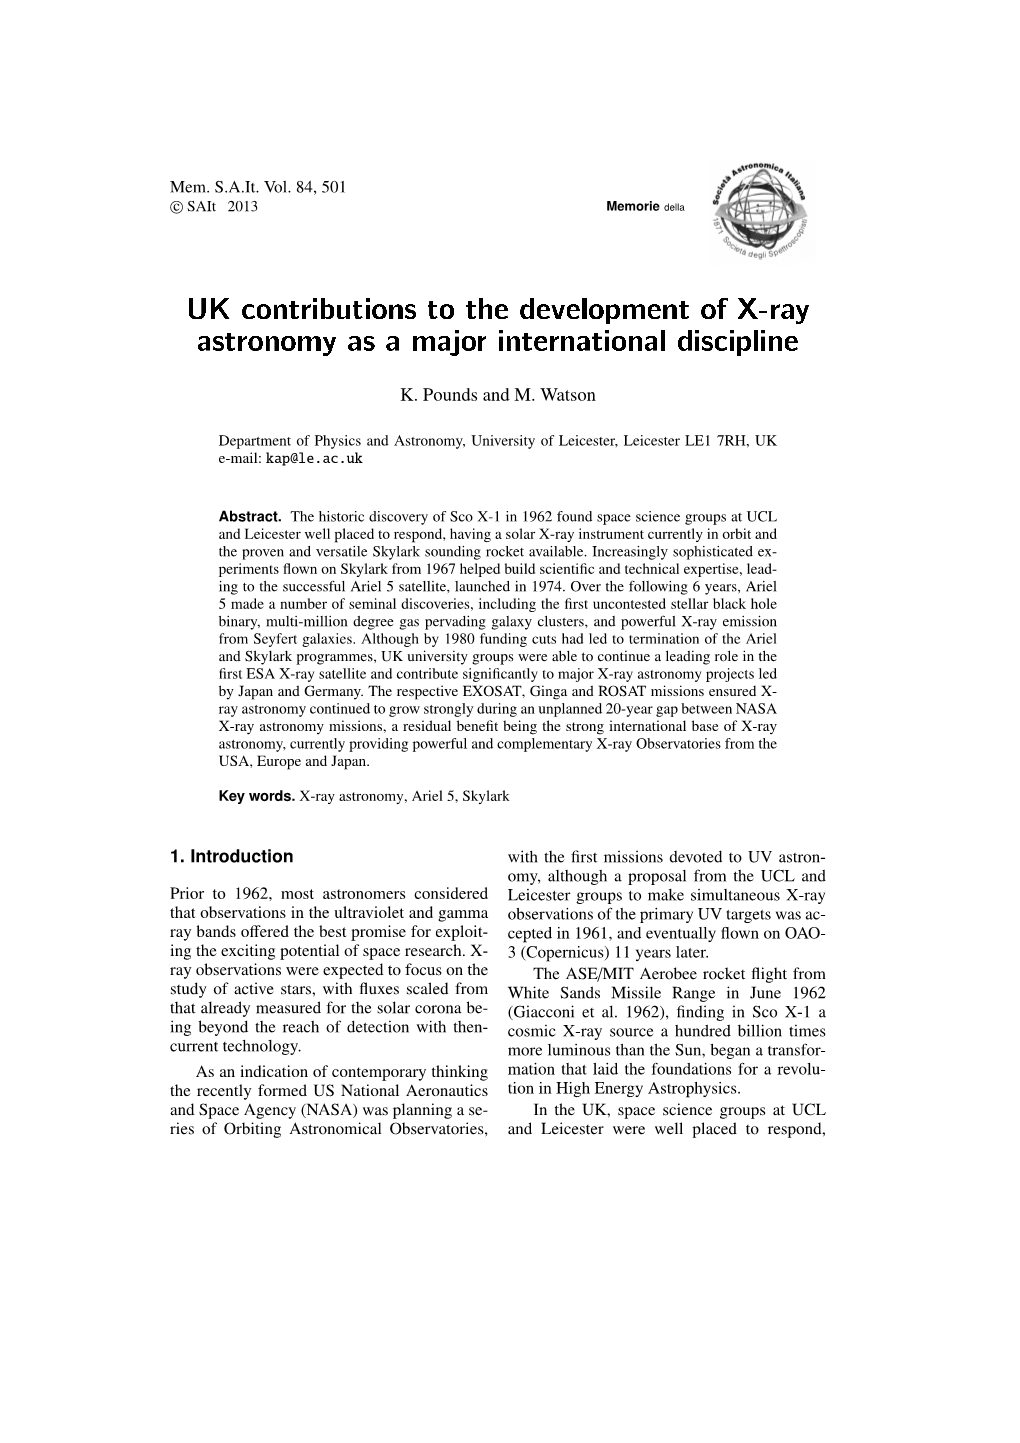 UK Contributions to the Development of X-Ray Astronomy As a Major International Discipline